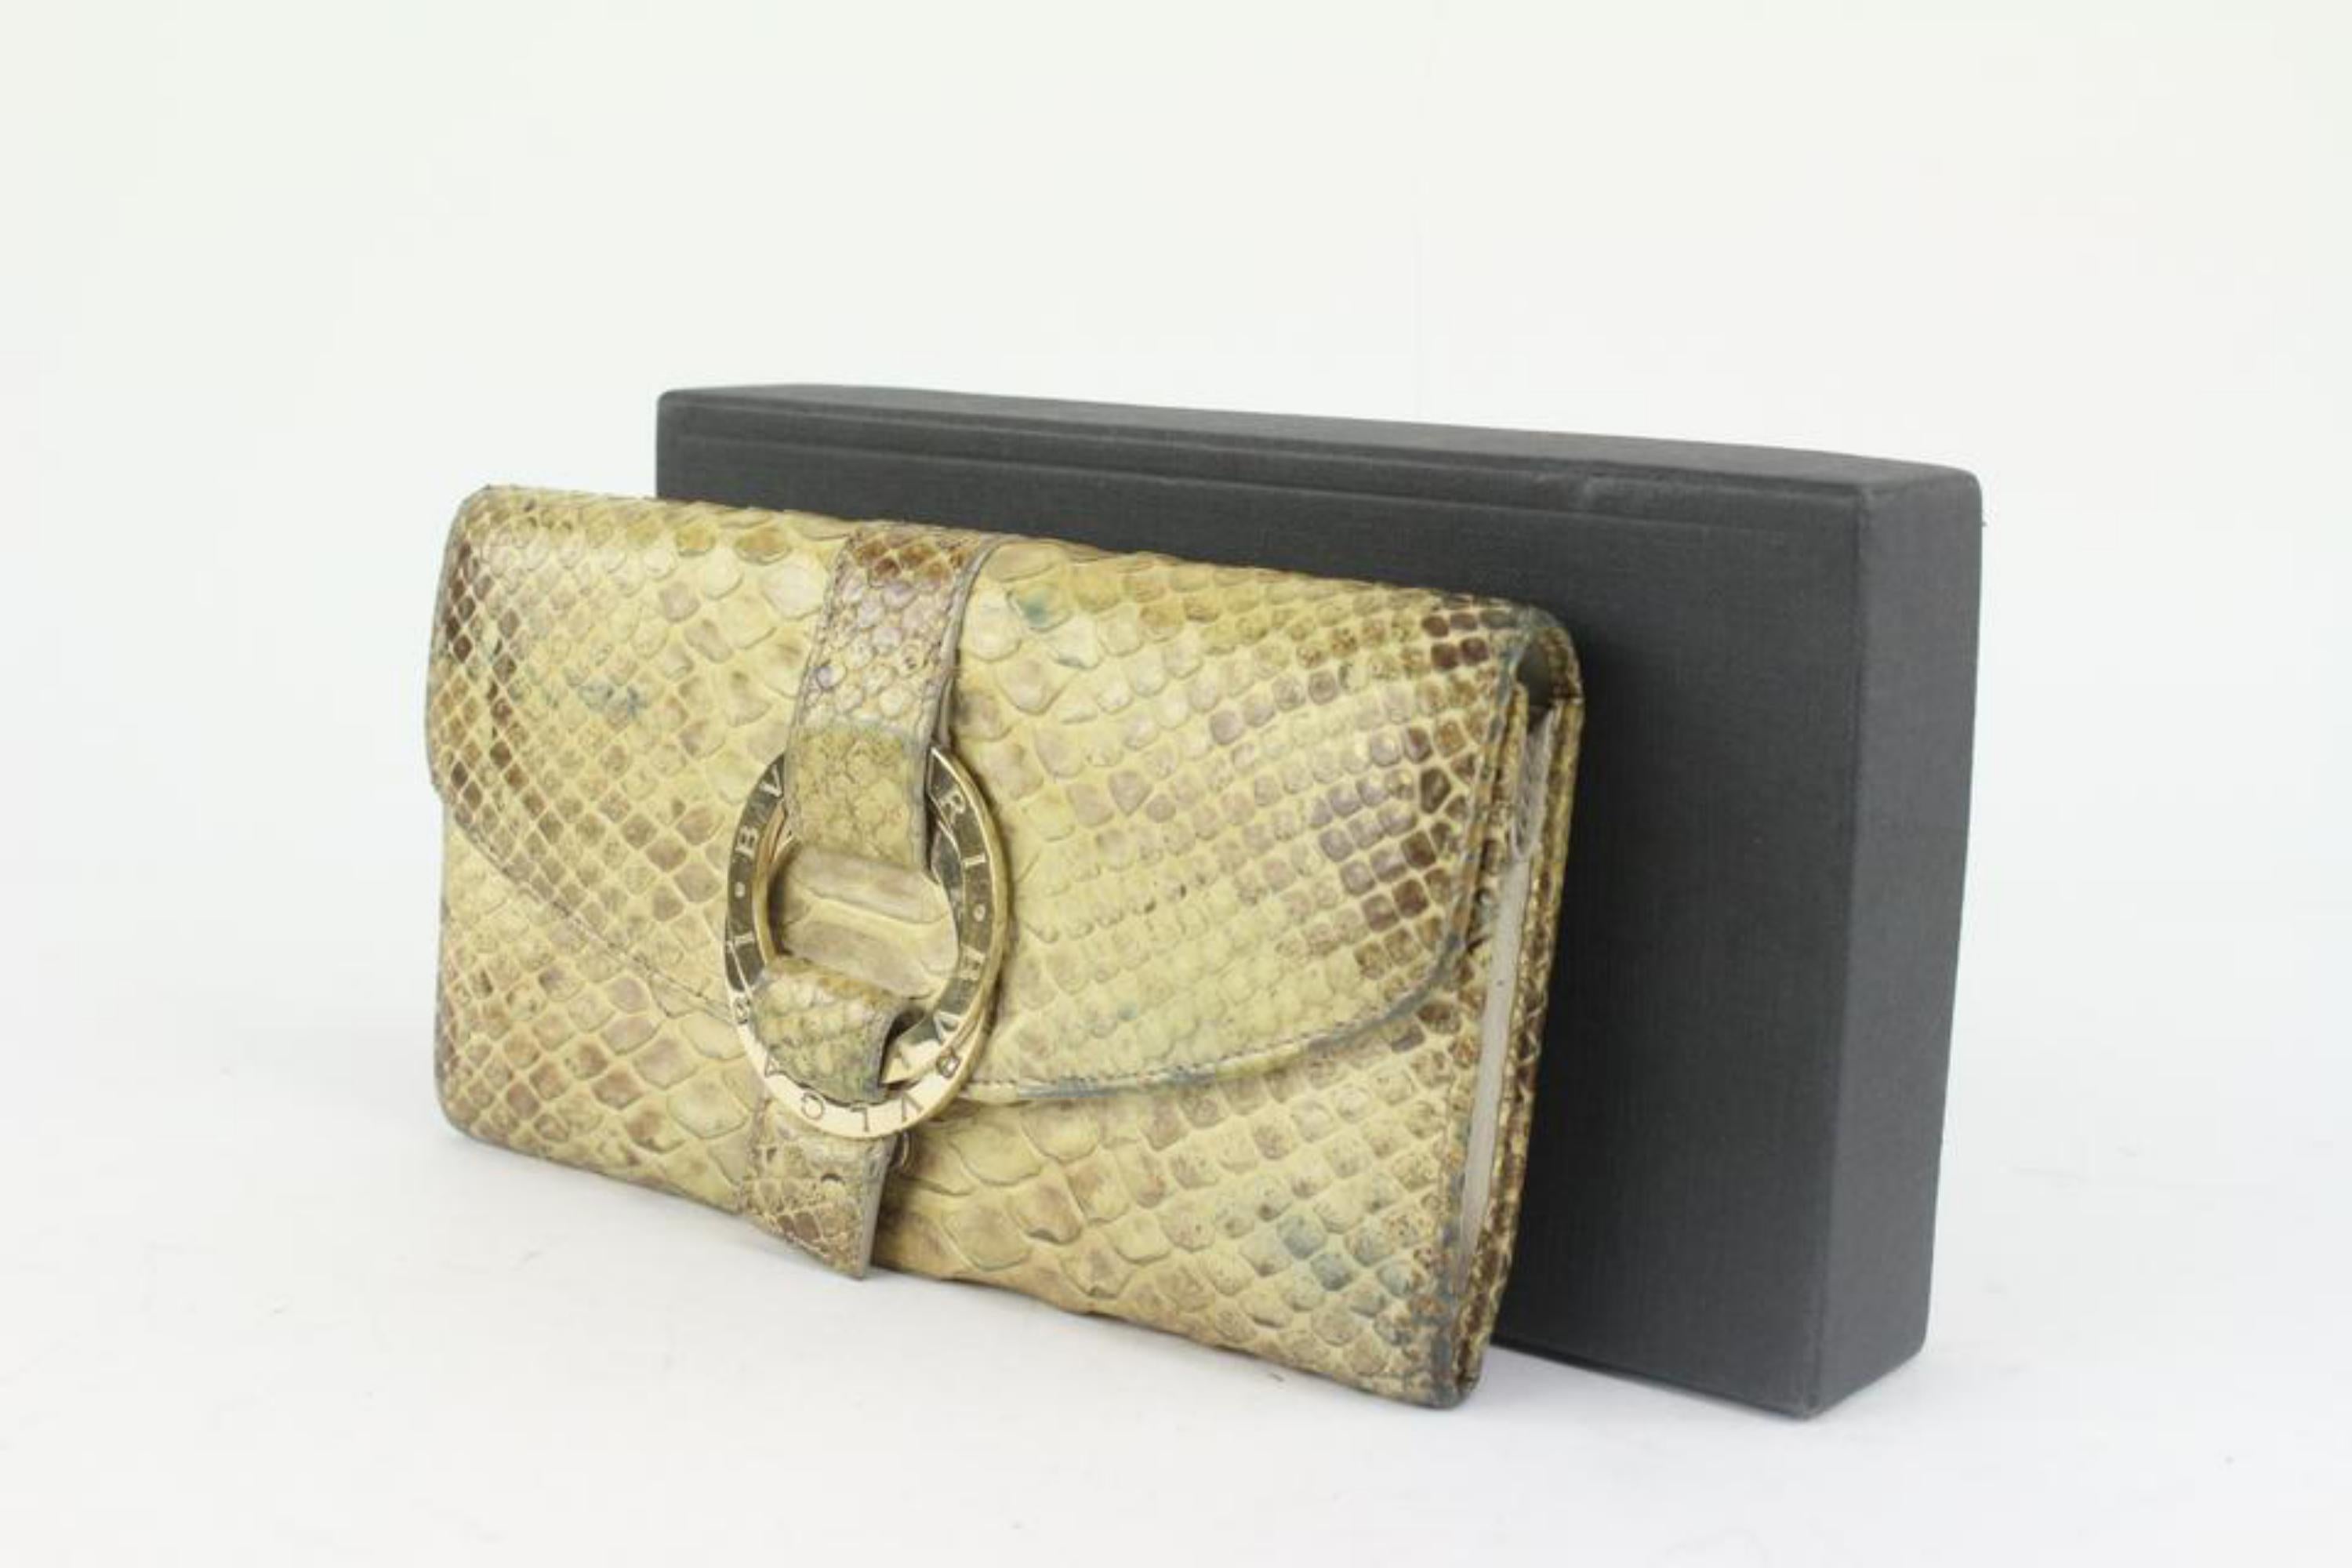 BVLGARI Beige-Yellow Python Flap Wallet 1216bvl43
Date Code/Serial Number: DP-K11-34459
Made In: Italy
Measurements: Length:  7.3